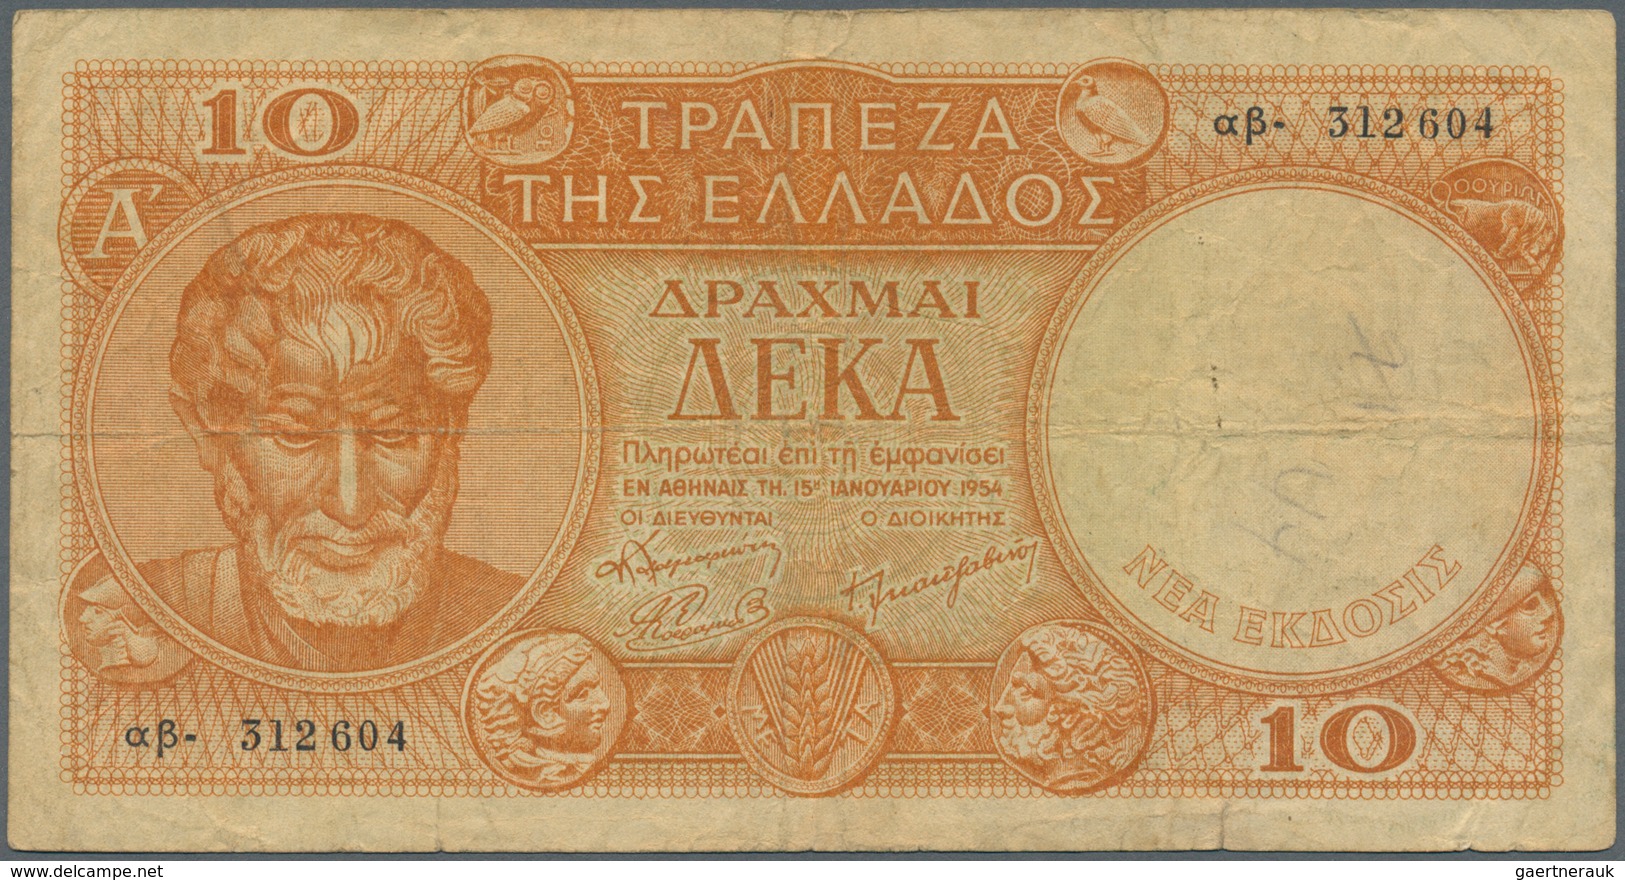 01643 Greece / Griechenland: 10 Drachmai 1954 P. 186a, Used With Several Folds, Stained Paper, Small Pen W - Grecia